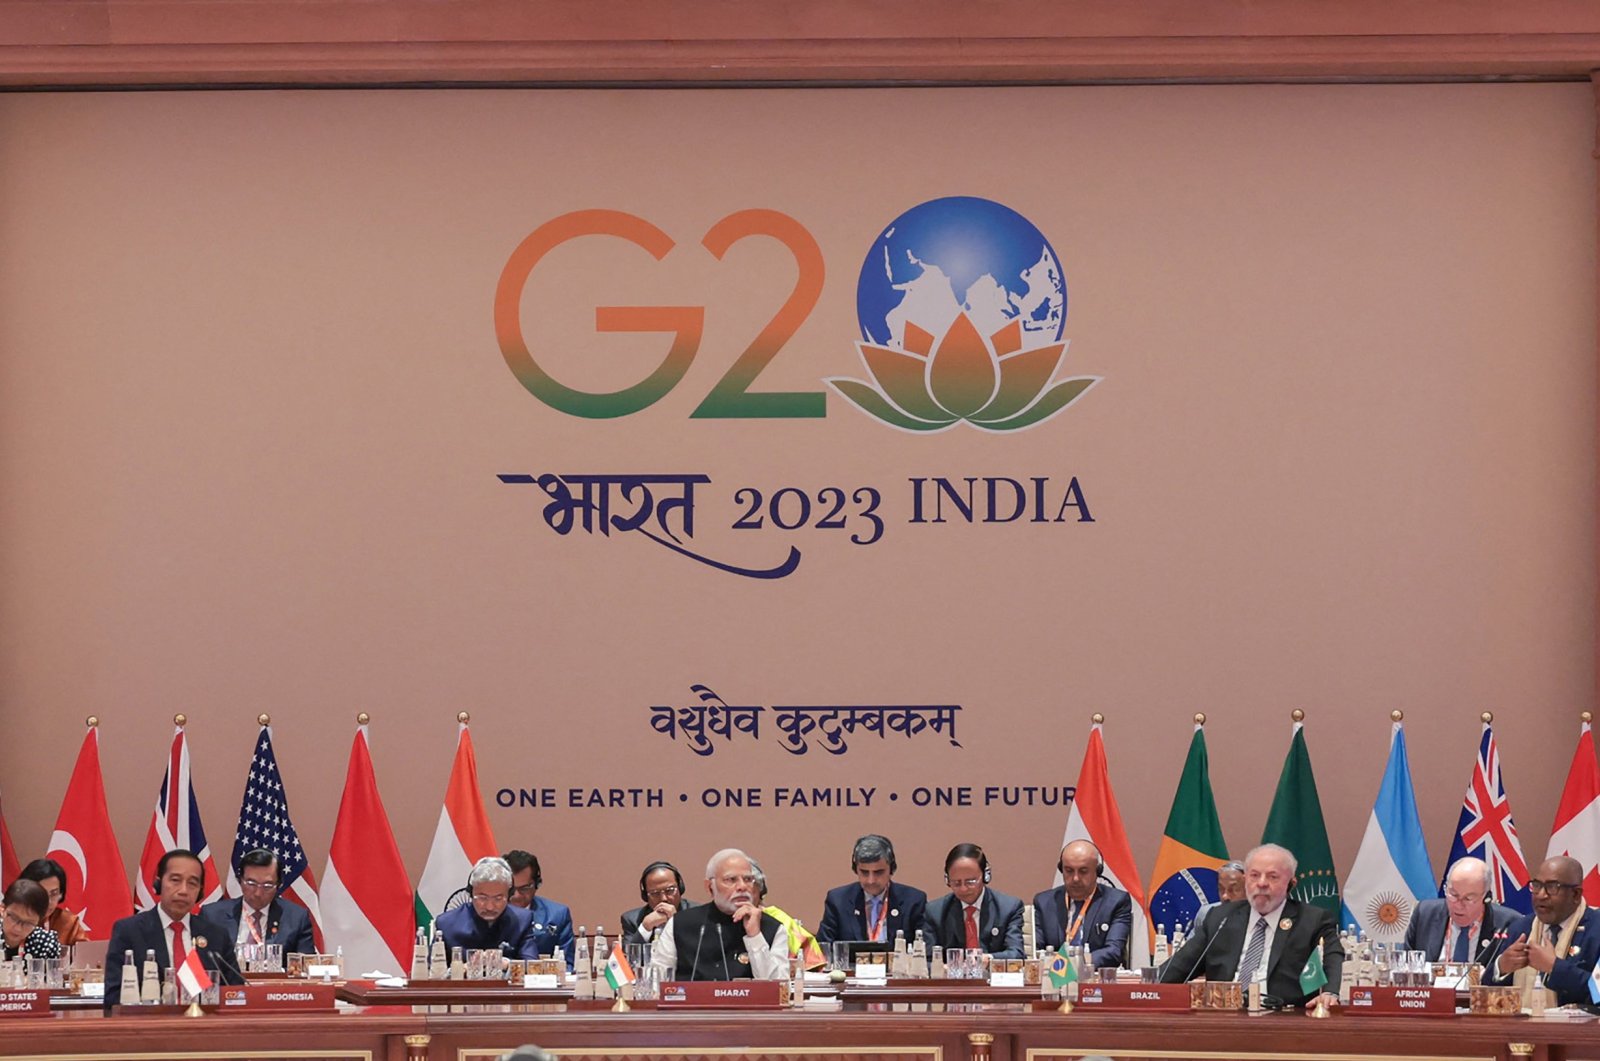 India&#039;s Prime Minister Narendra Modi (C) along with world leaders attends the closing session of the G-20 Leaders&#039; Summit, in New Delhi, India, Sept. 10, 2023. (AFP Photo)